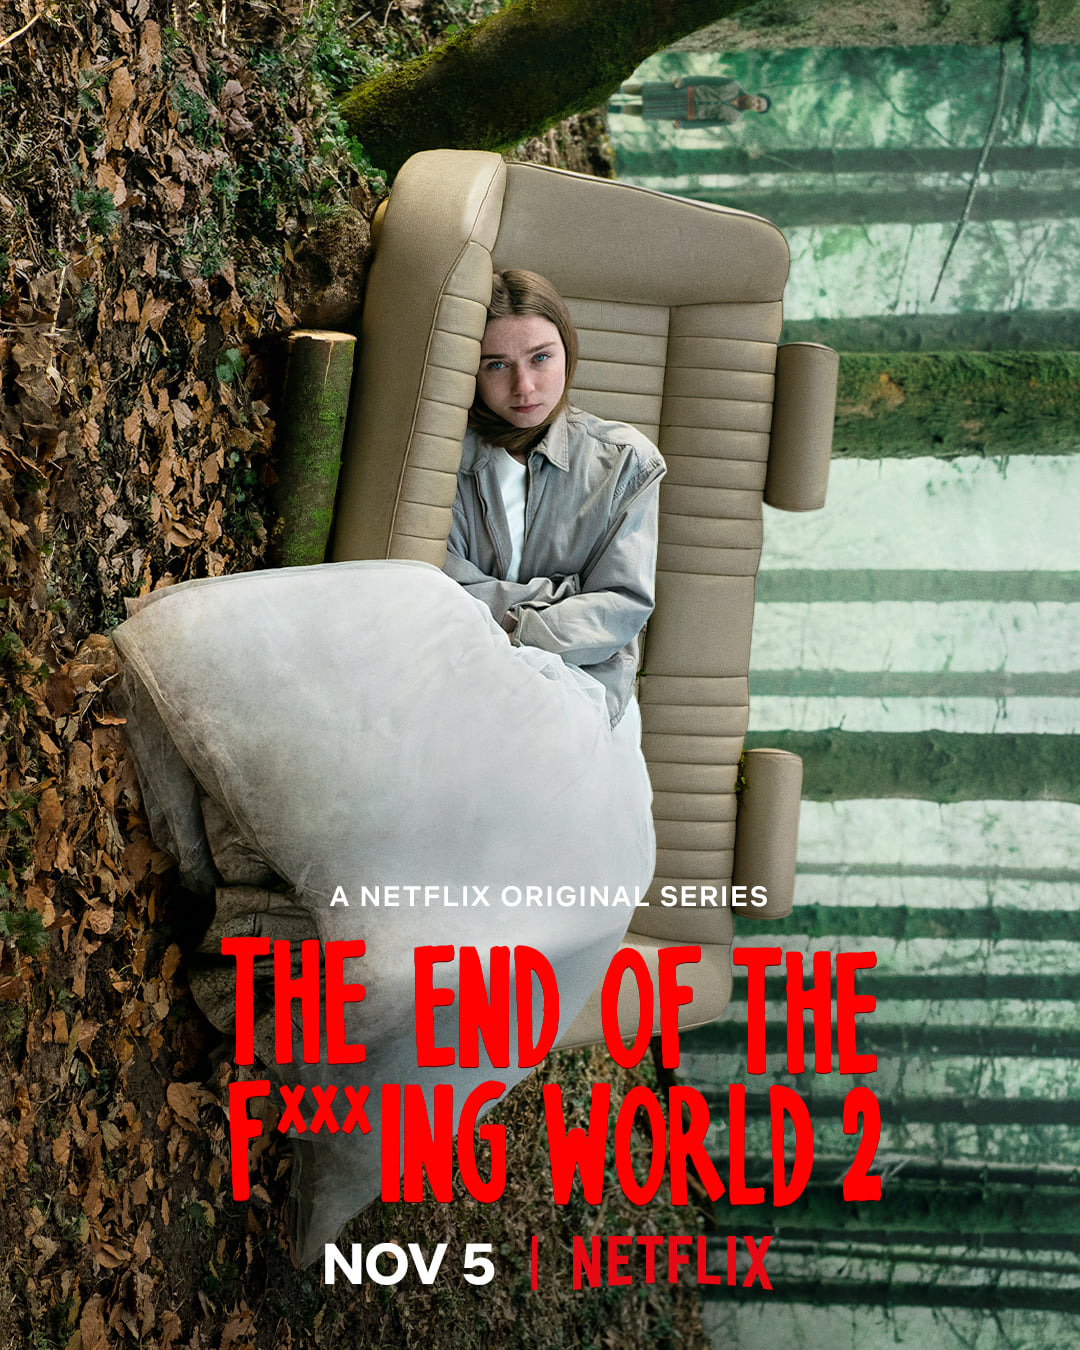 THE END OF THE FuckING WORLD